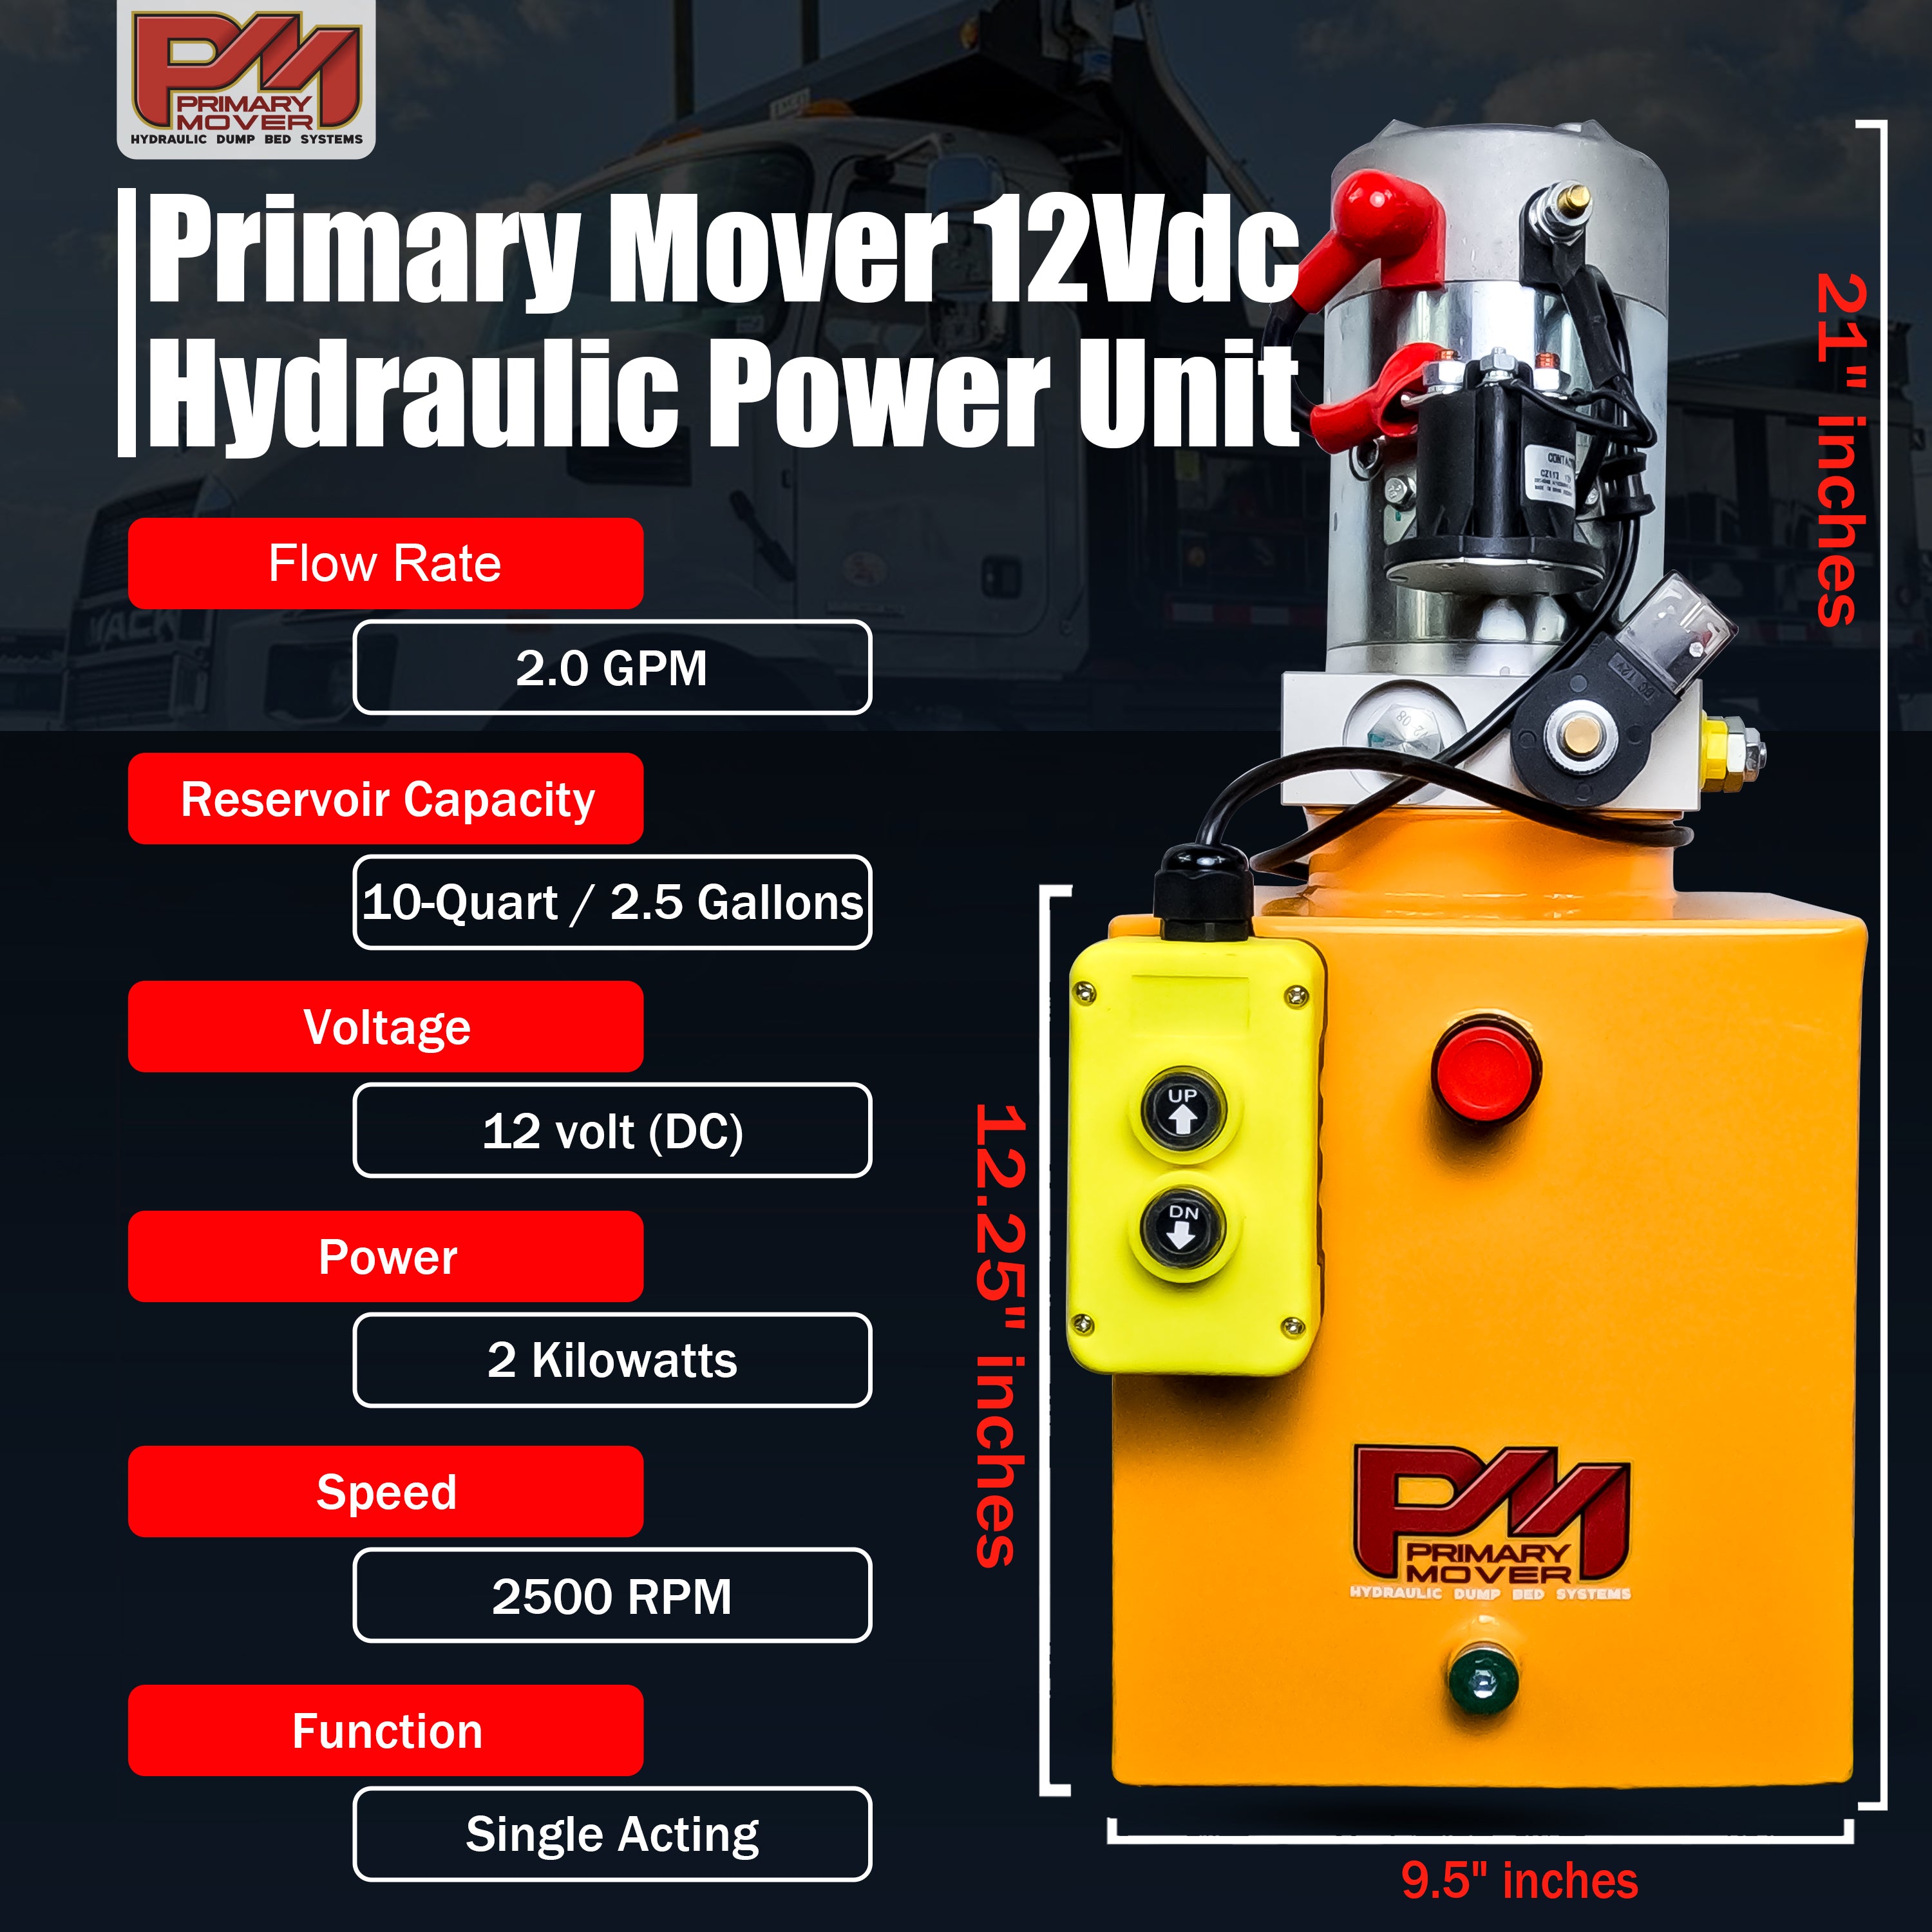 A close-up of the Primary Mover 12V Single-Acting Hydraulic Pump with a red button and yellow surface, embodying efficiency and reliability in hydraulic systems.